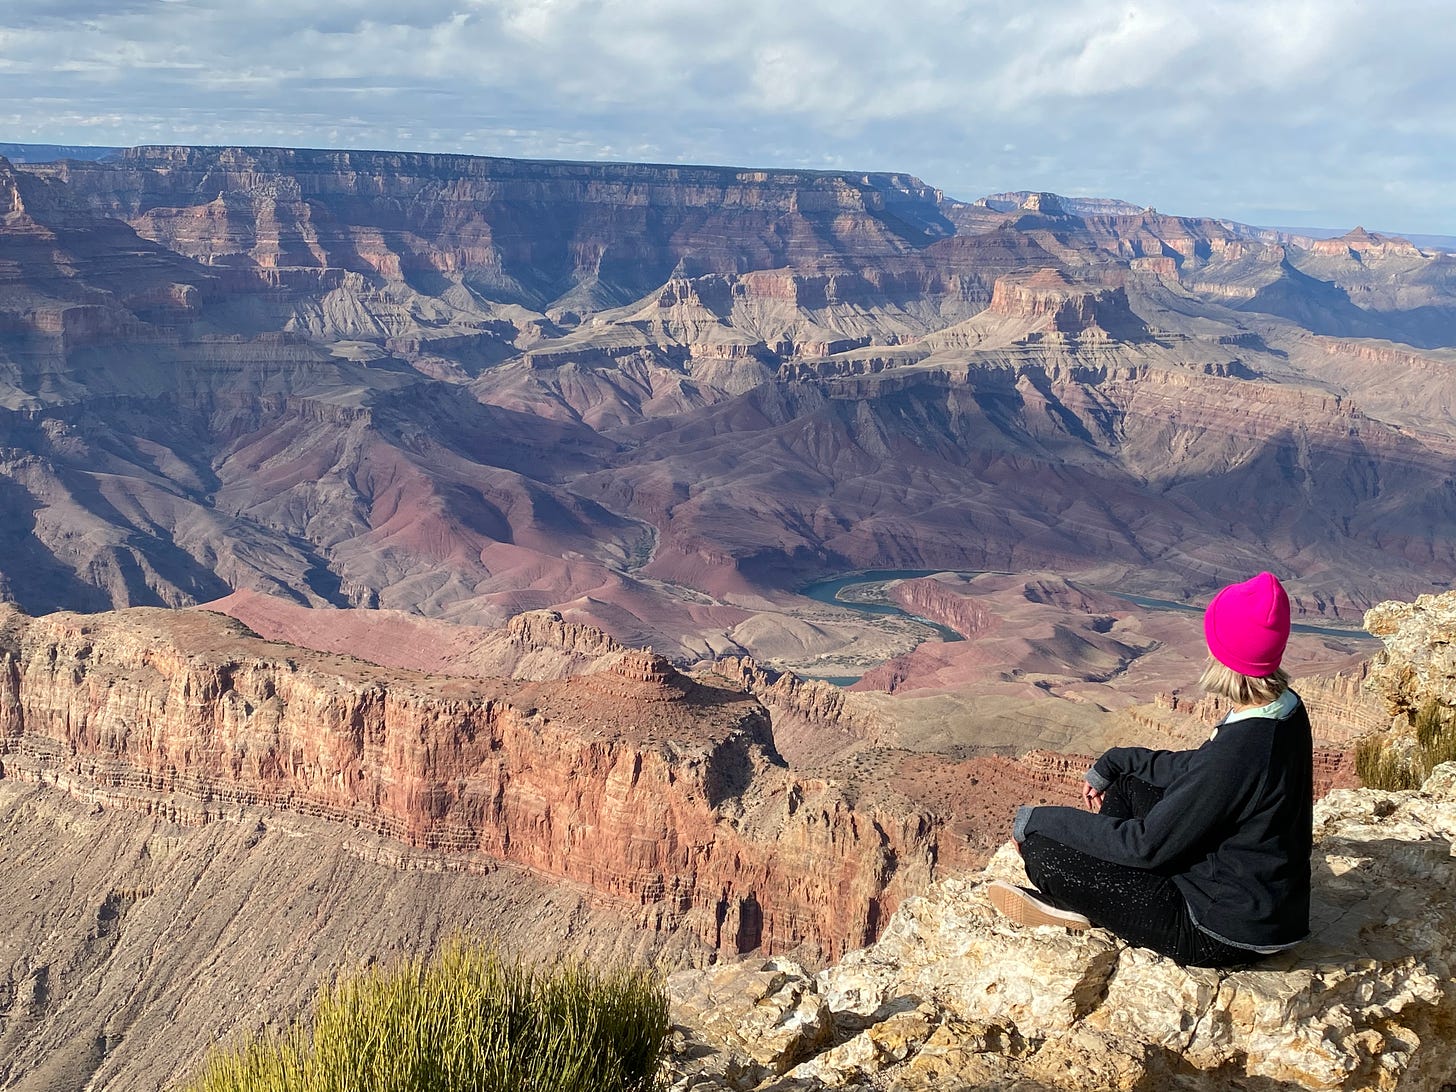 A woman in a pink beanie sits on the rim of the Grand Canyon, looking out on its expanse below.